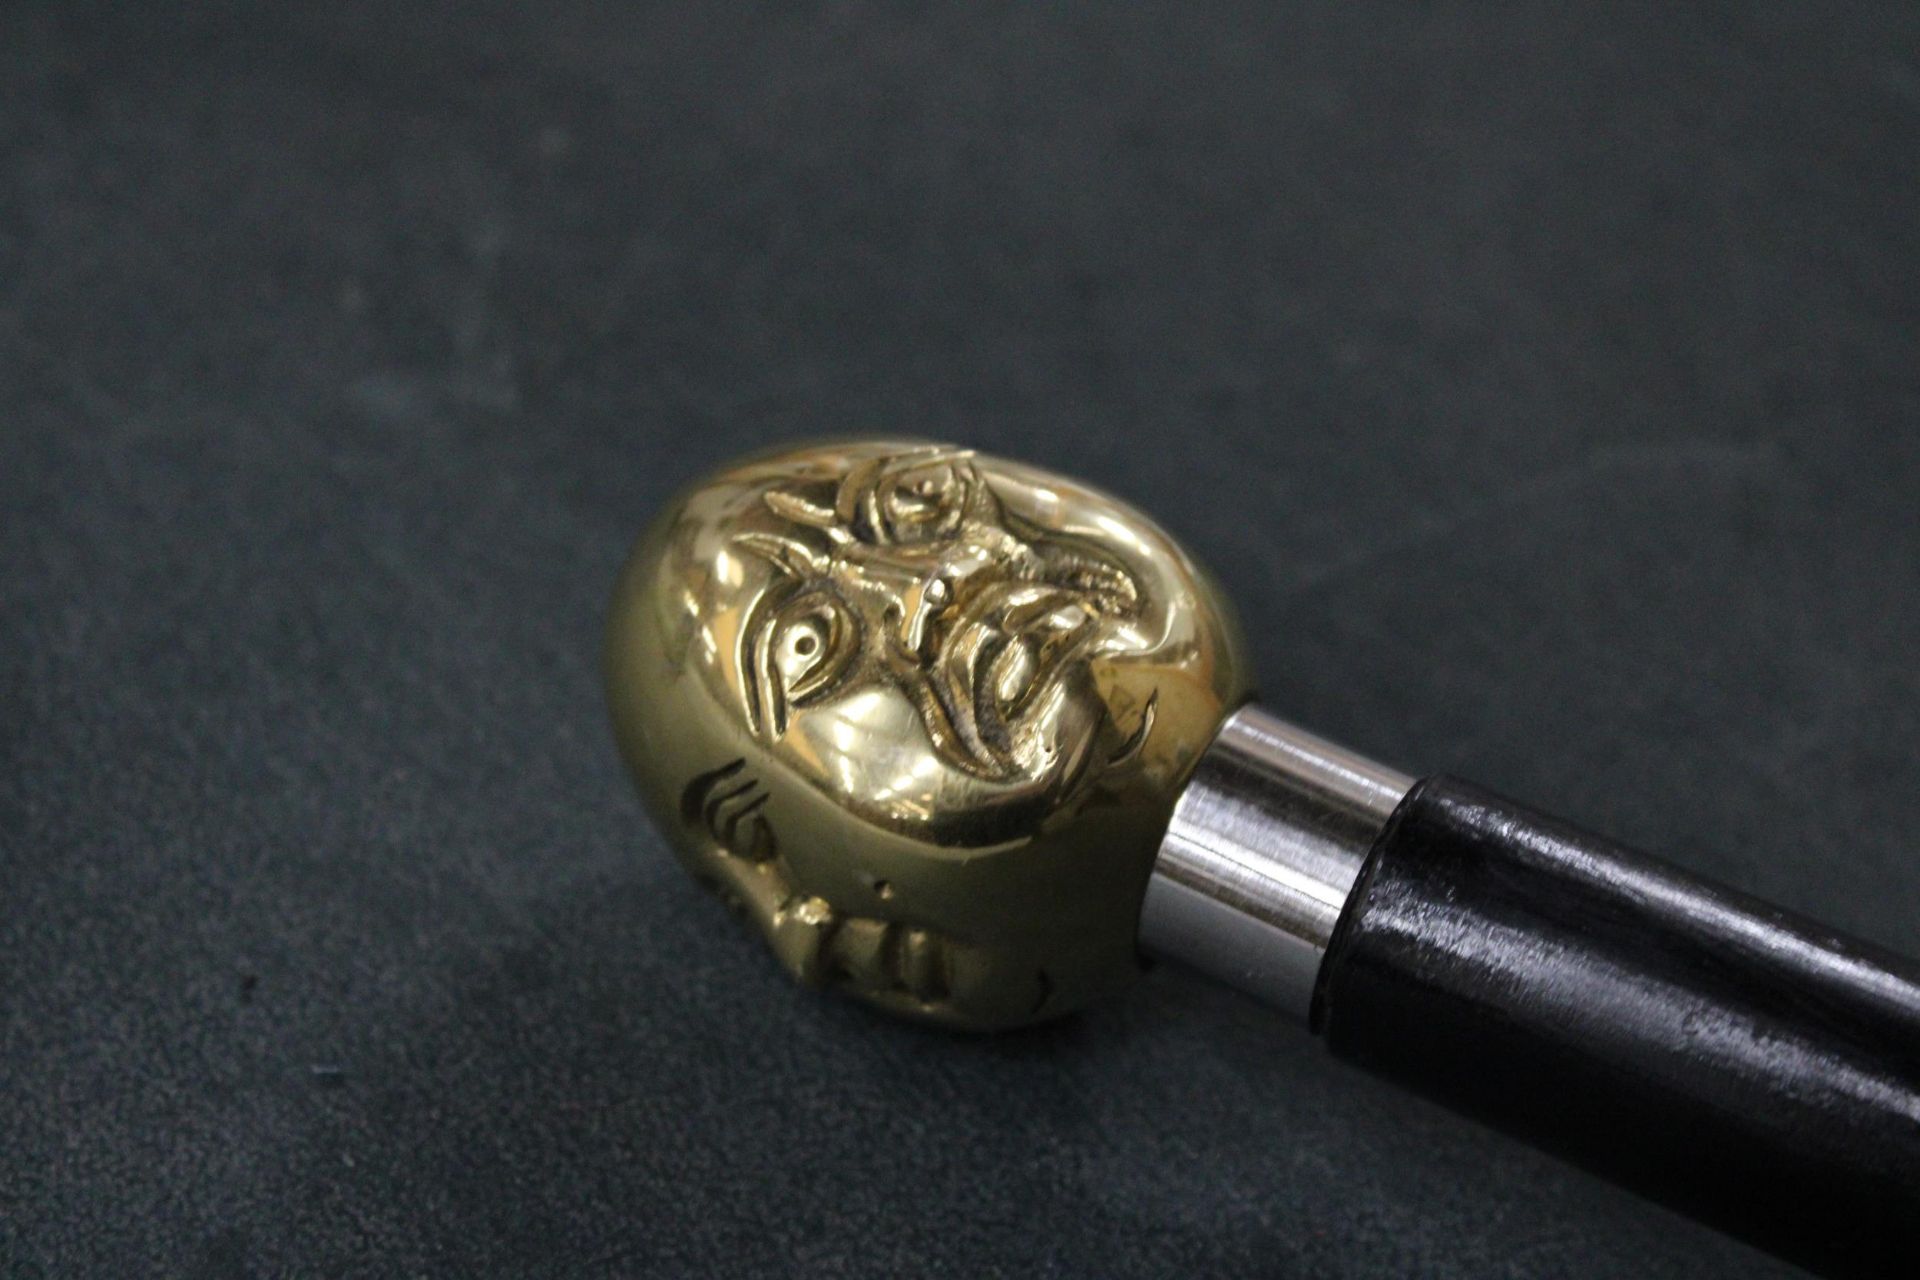 A BRASS FOUR FACED BUDDHA HANDLE WALKING STICK - Image 4 of 6